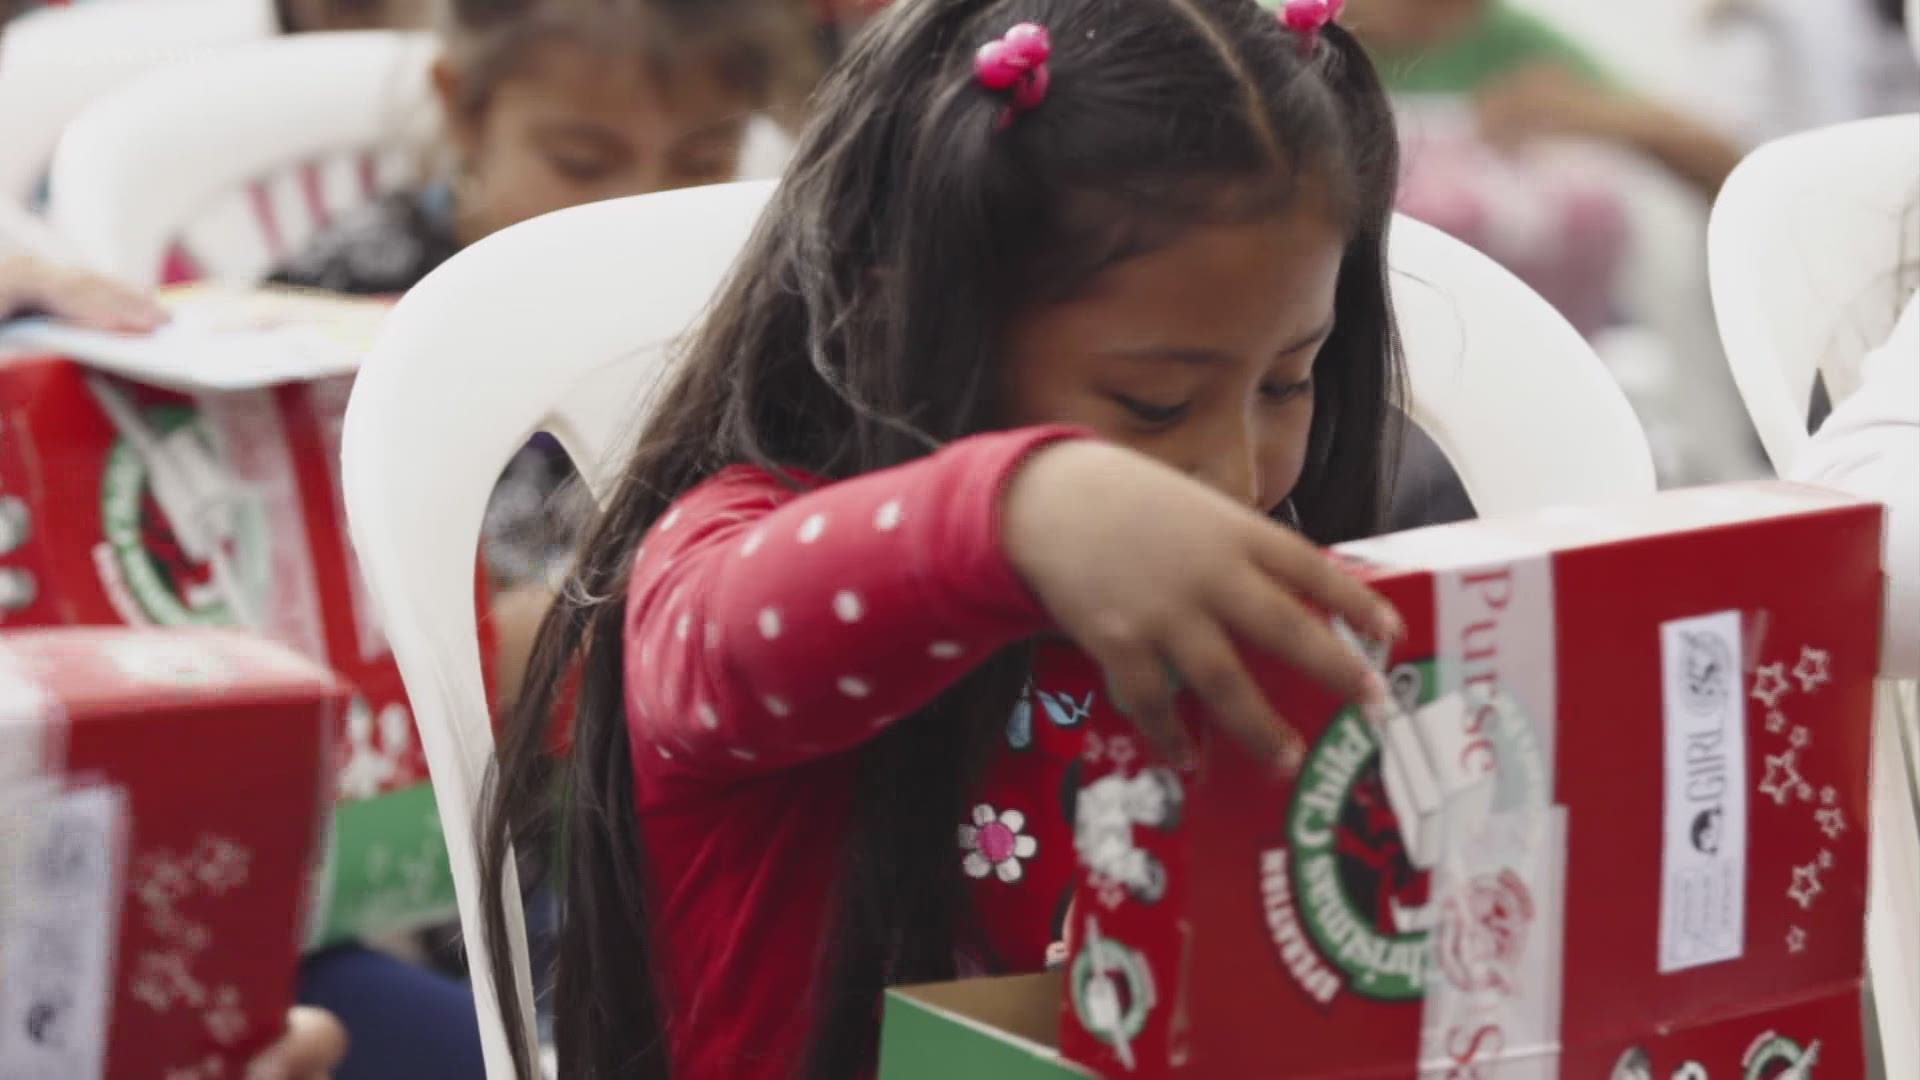 Operation Christmas provides shoe box of gift items to children around the world.